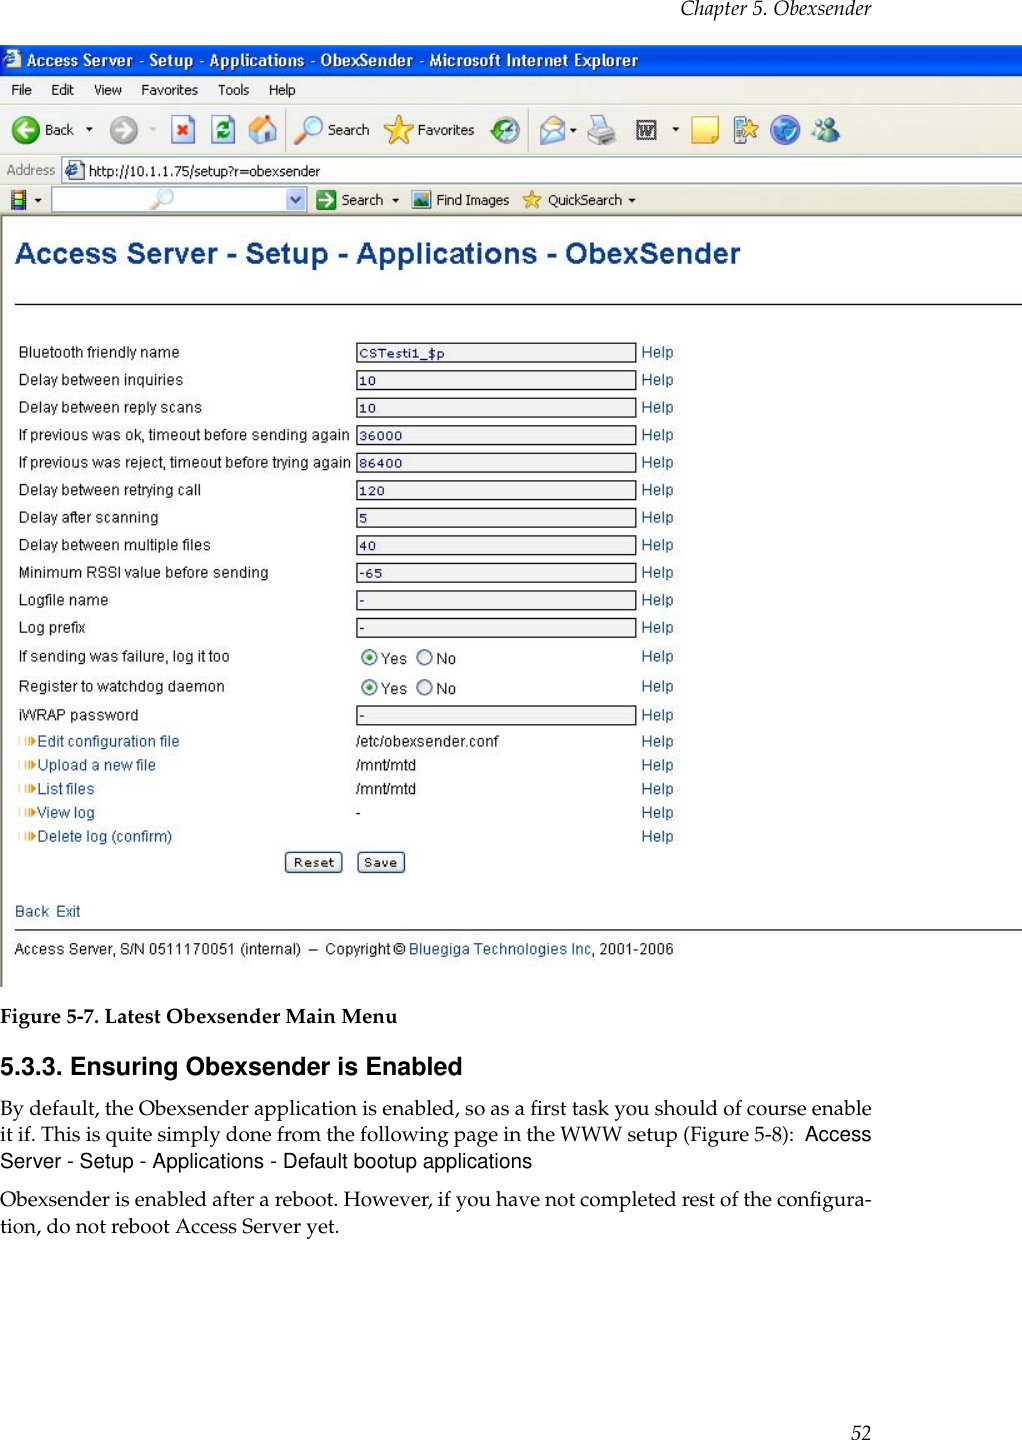 Chapter 5. ObexsenderFigure 5-7. Latest Obexsender Main Menu5.3.3. Ensuring Obexsender is EnabledBy default, the Obexsender application is enabled, so as a ﬁrst task you should of course enableit if. This is quite simply done from the following page in the WWW setup (Figure 5-8): AccessServer - Setup - Applications - Default bootup applicationsObexsender is enabled after a reboot. However, if you have not completed rest of the conﬁgura-tion, do not reboot Access Server yet.52